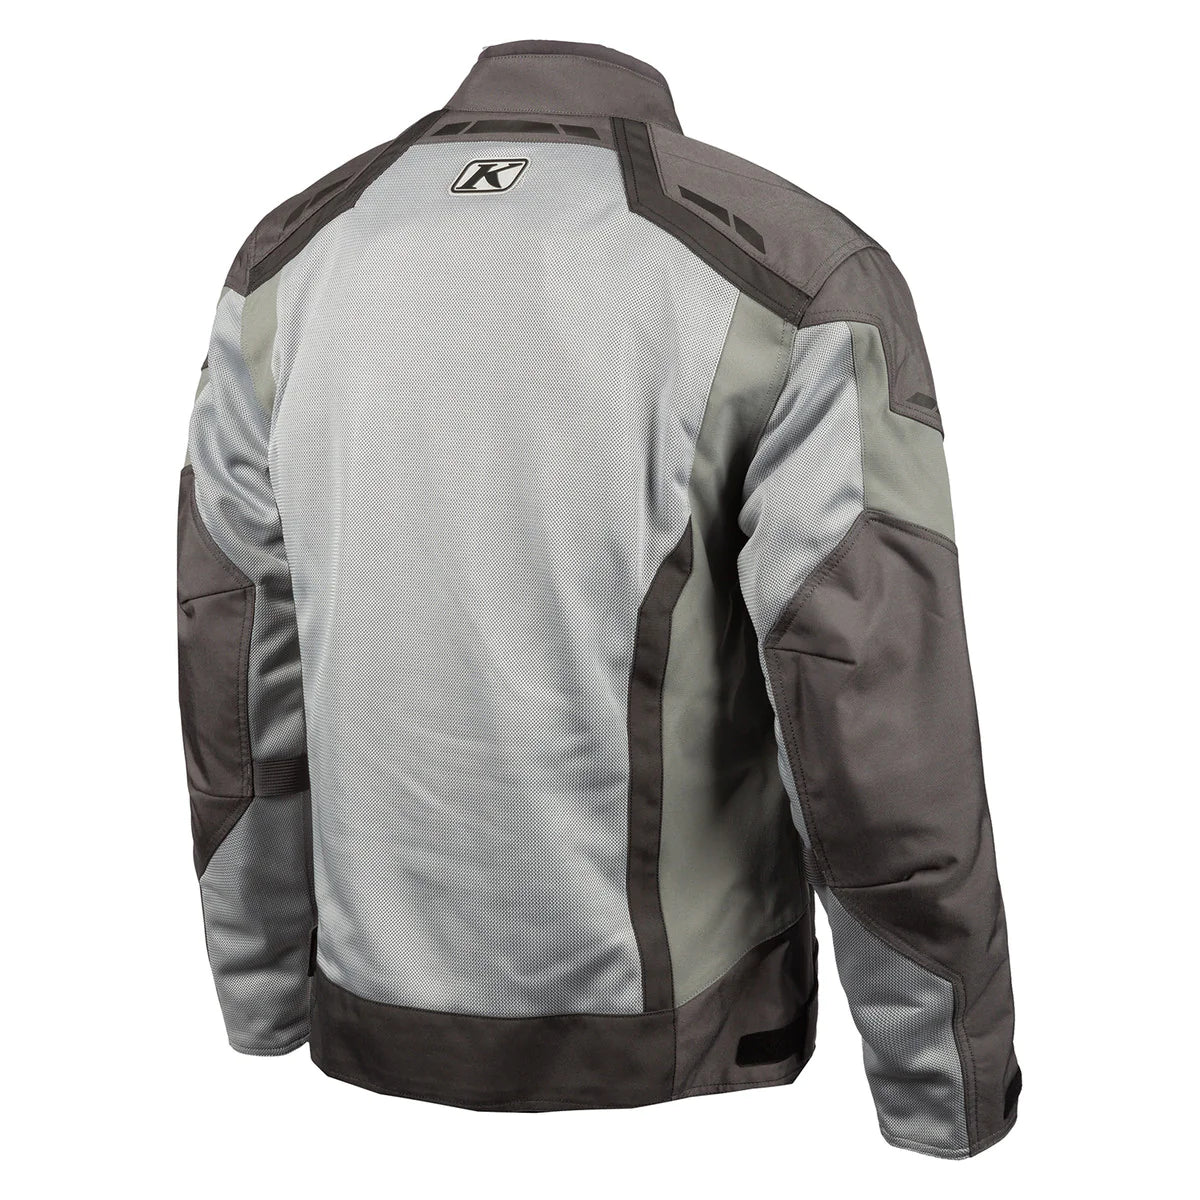 Klim Induction Cool Gray Jacket for motorcycle back view side